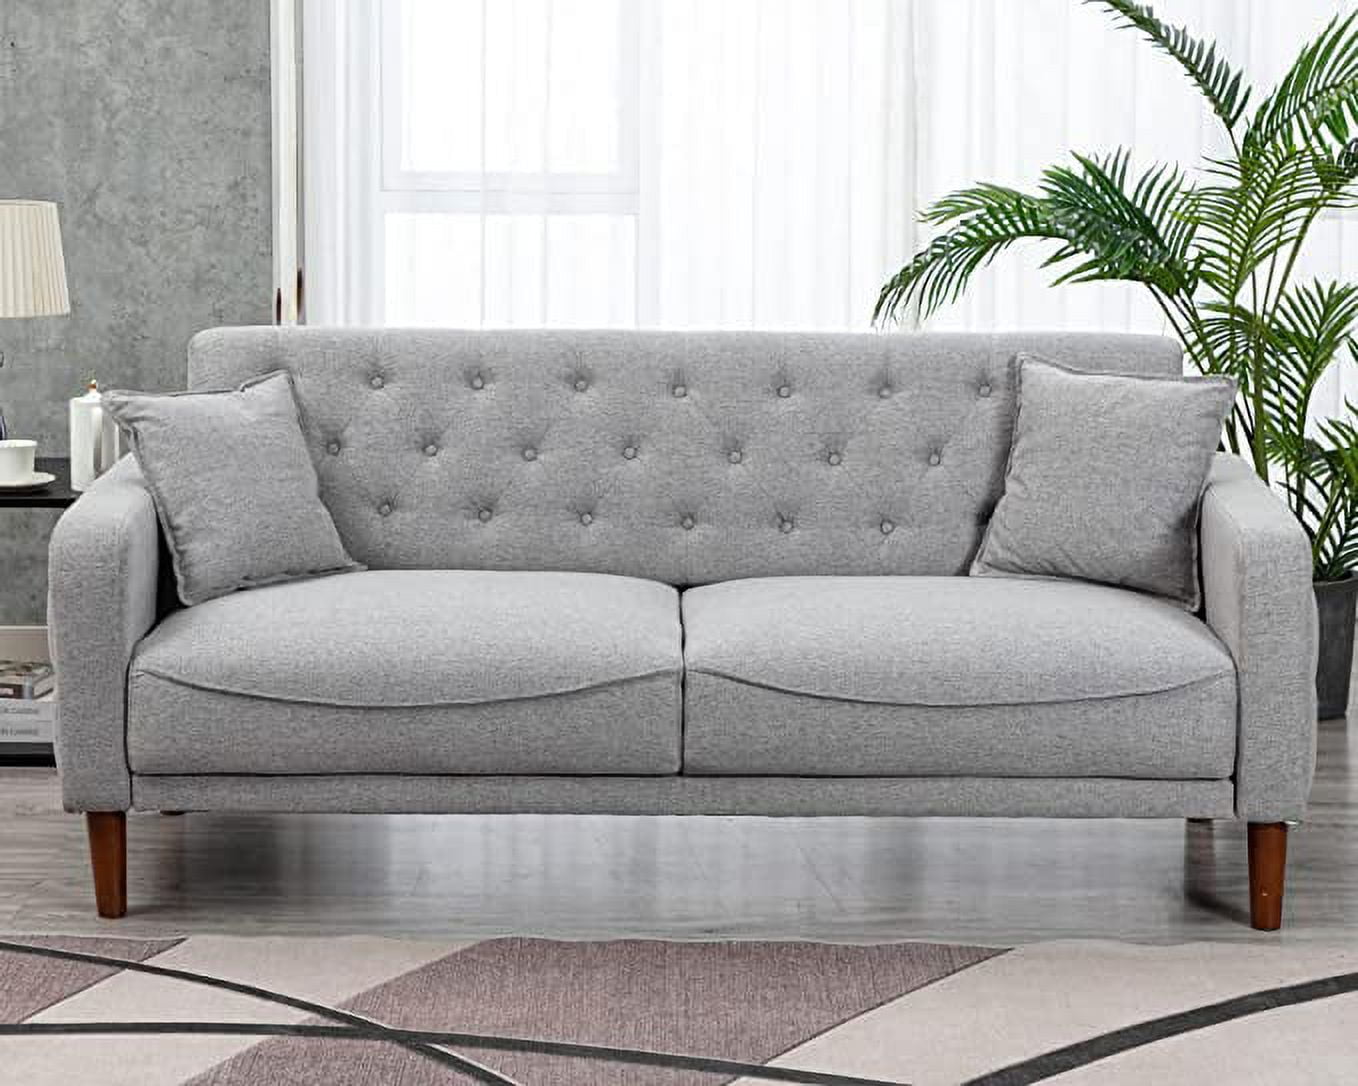 3 Seater Sofa Couch Modern Linen Tufed